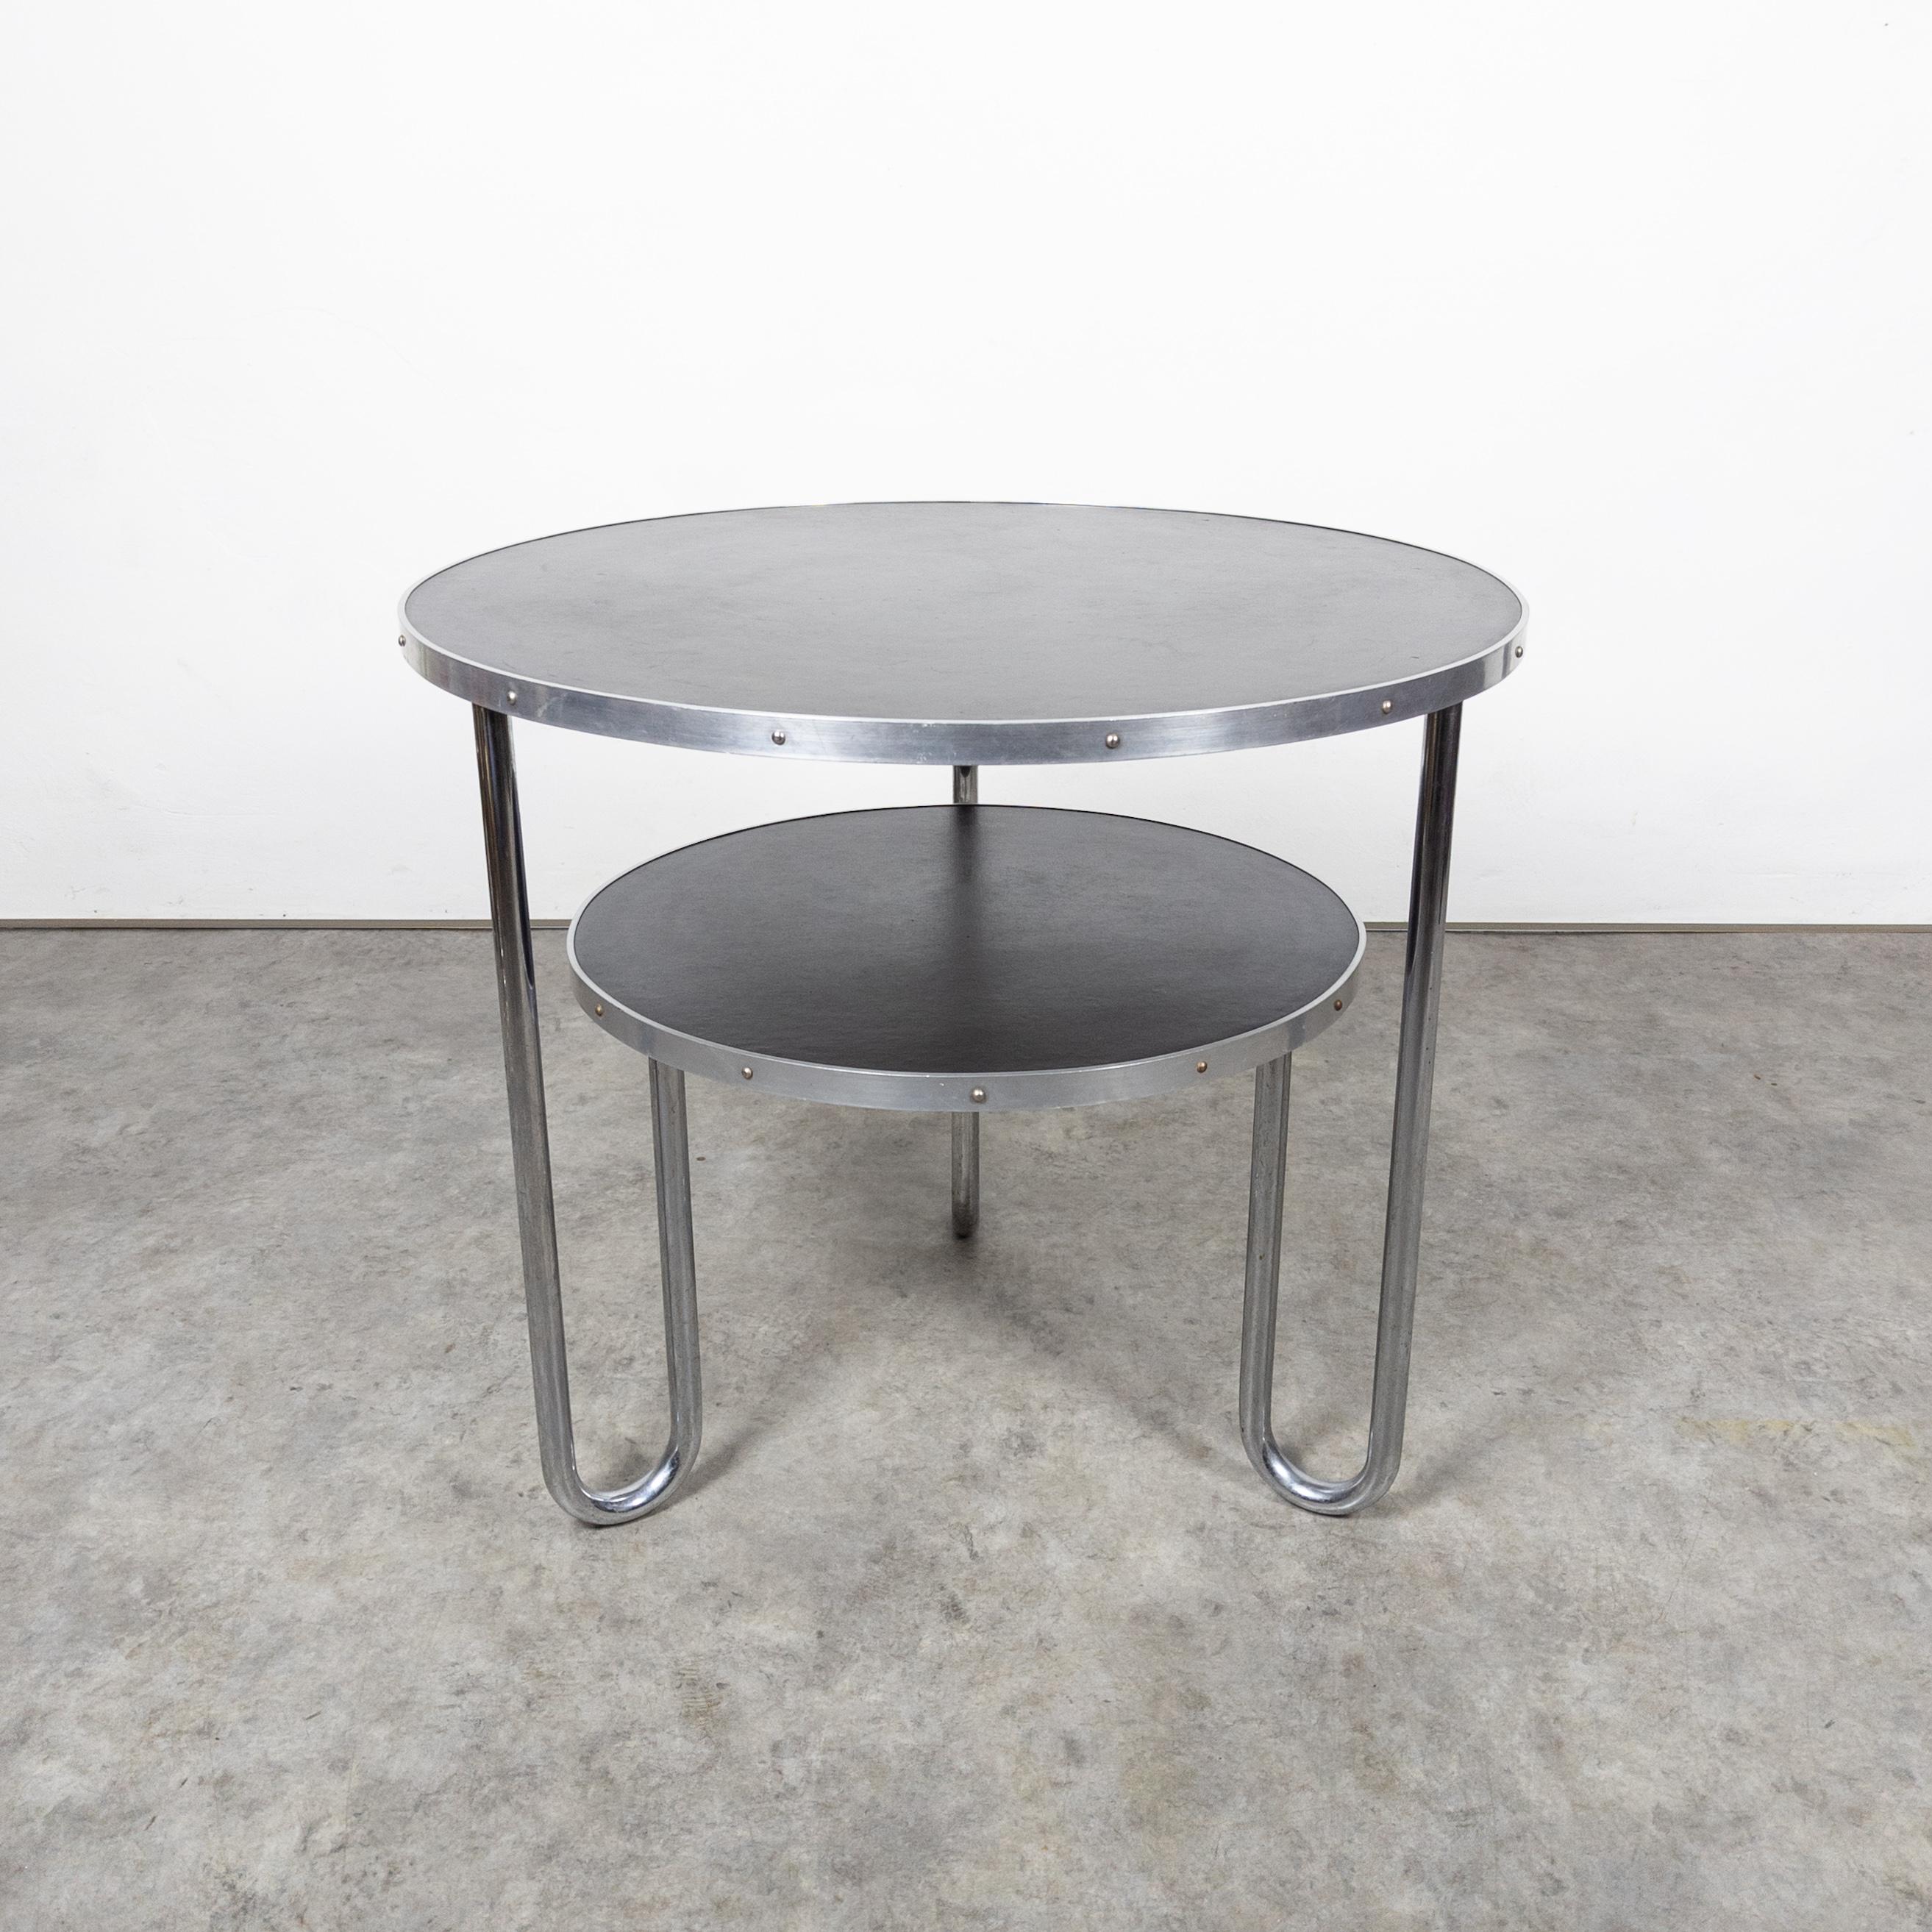 The Mauser Werke Bauhaus tubular steel table captures the essence of iconic Bauhaus design principles. Marked by clean lines and a minimalist aesthetic, this table showcases a sleek tubular steel frame seamlessly blending form and function. The